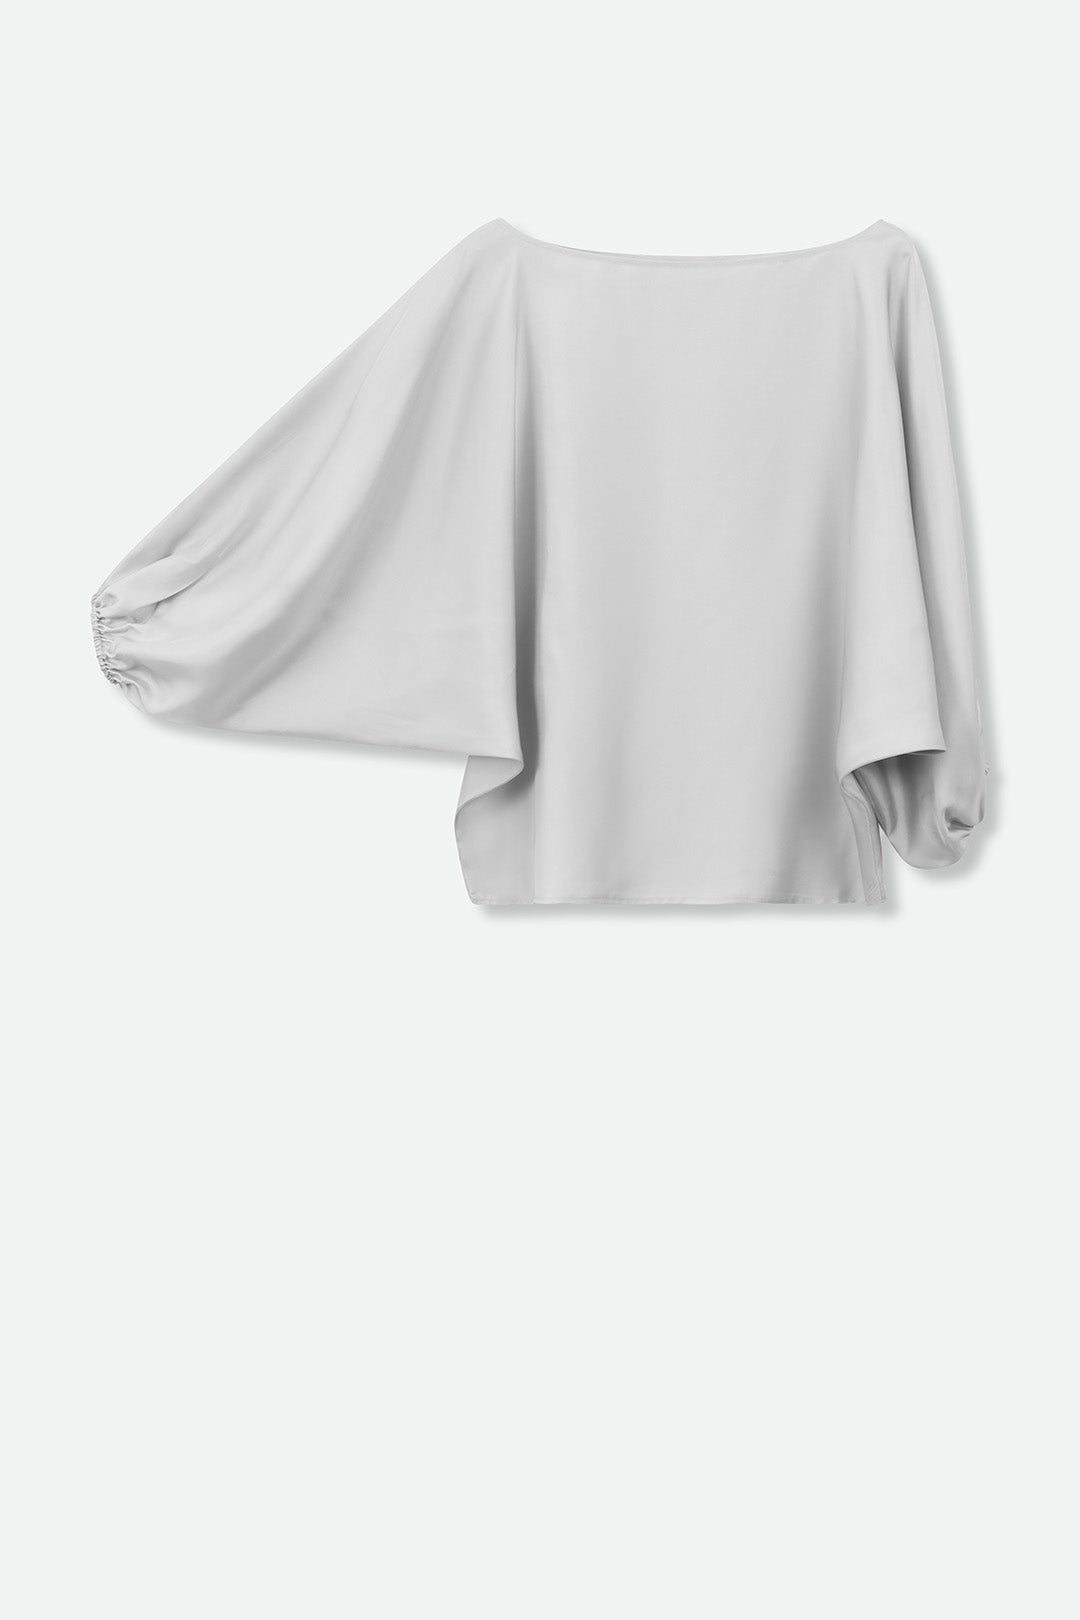 ANDIE ONE-SIZE BOATNECK TOP IN SILK CHARMEUSE